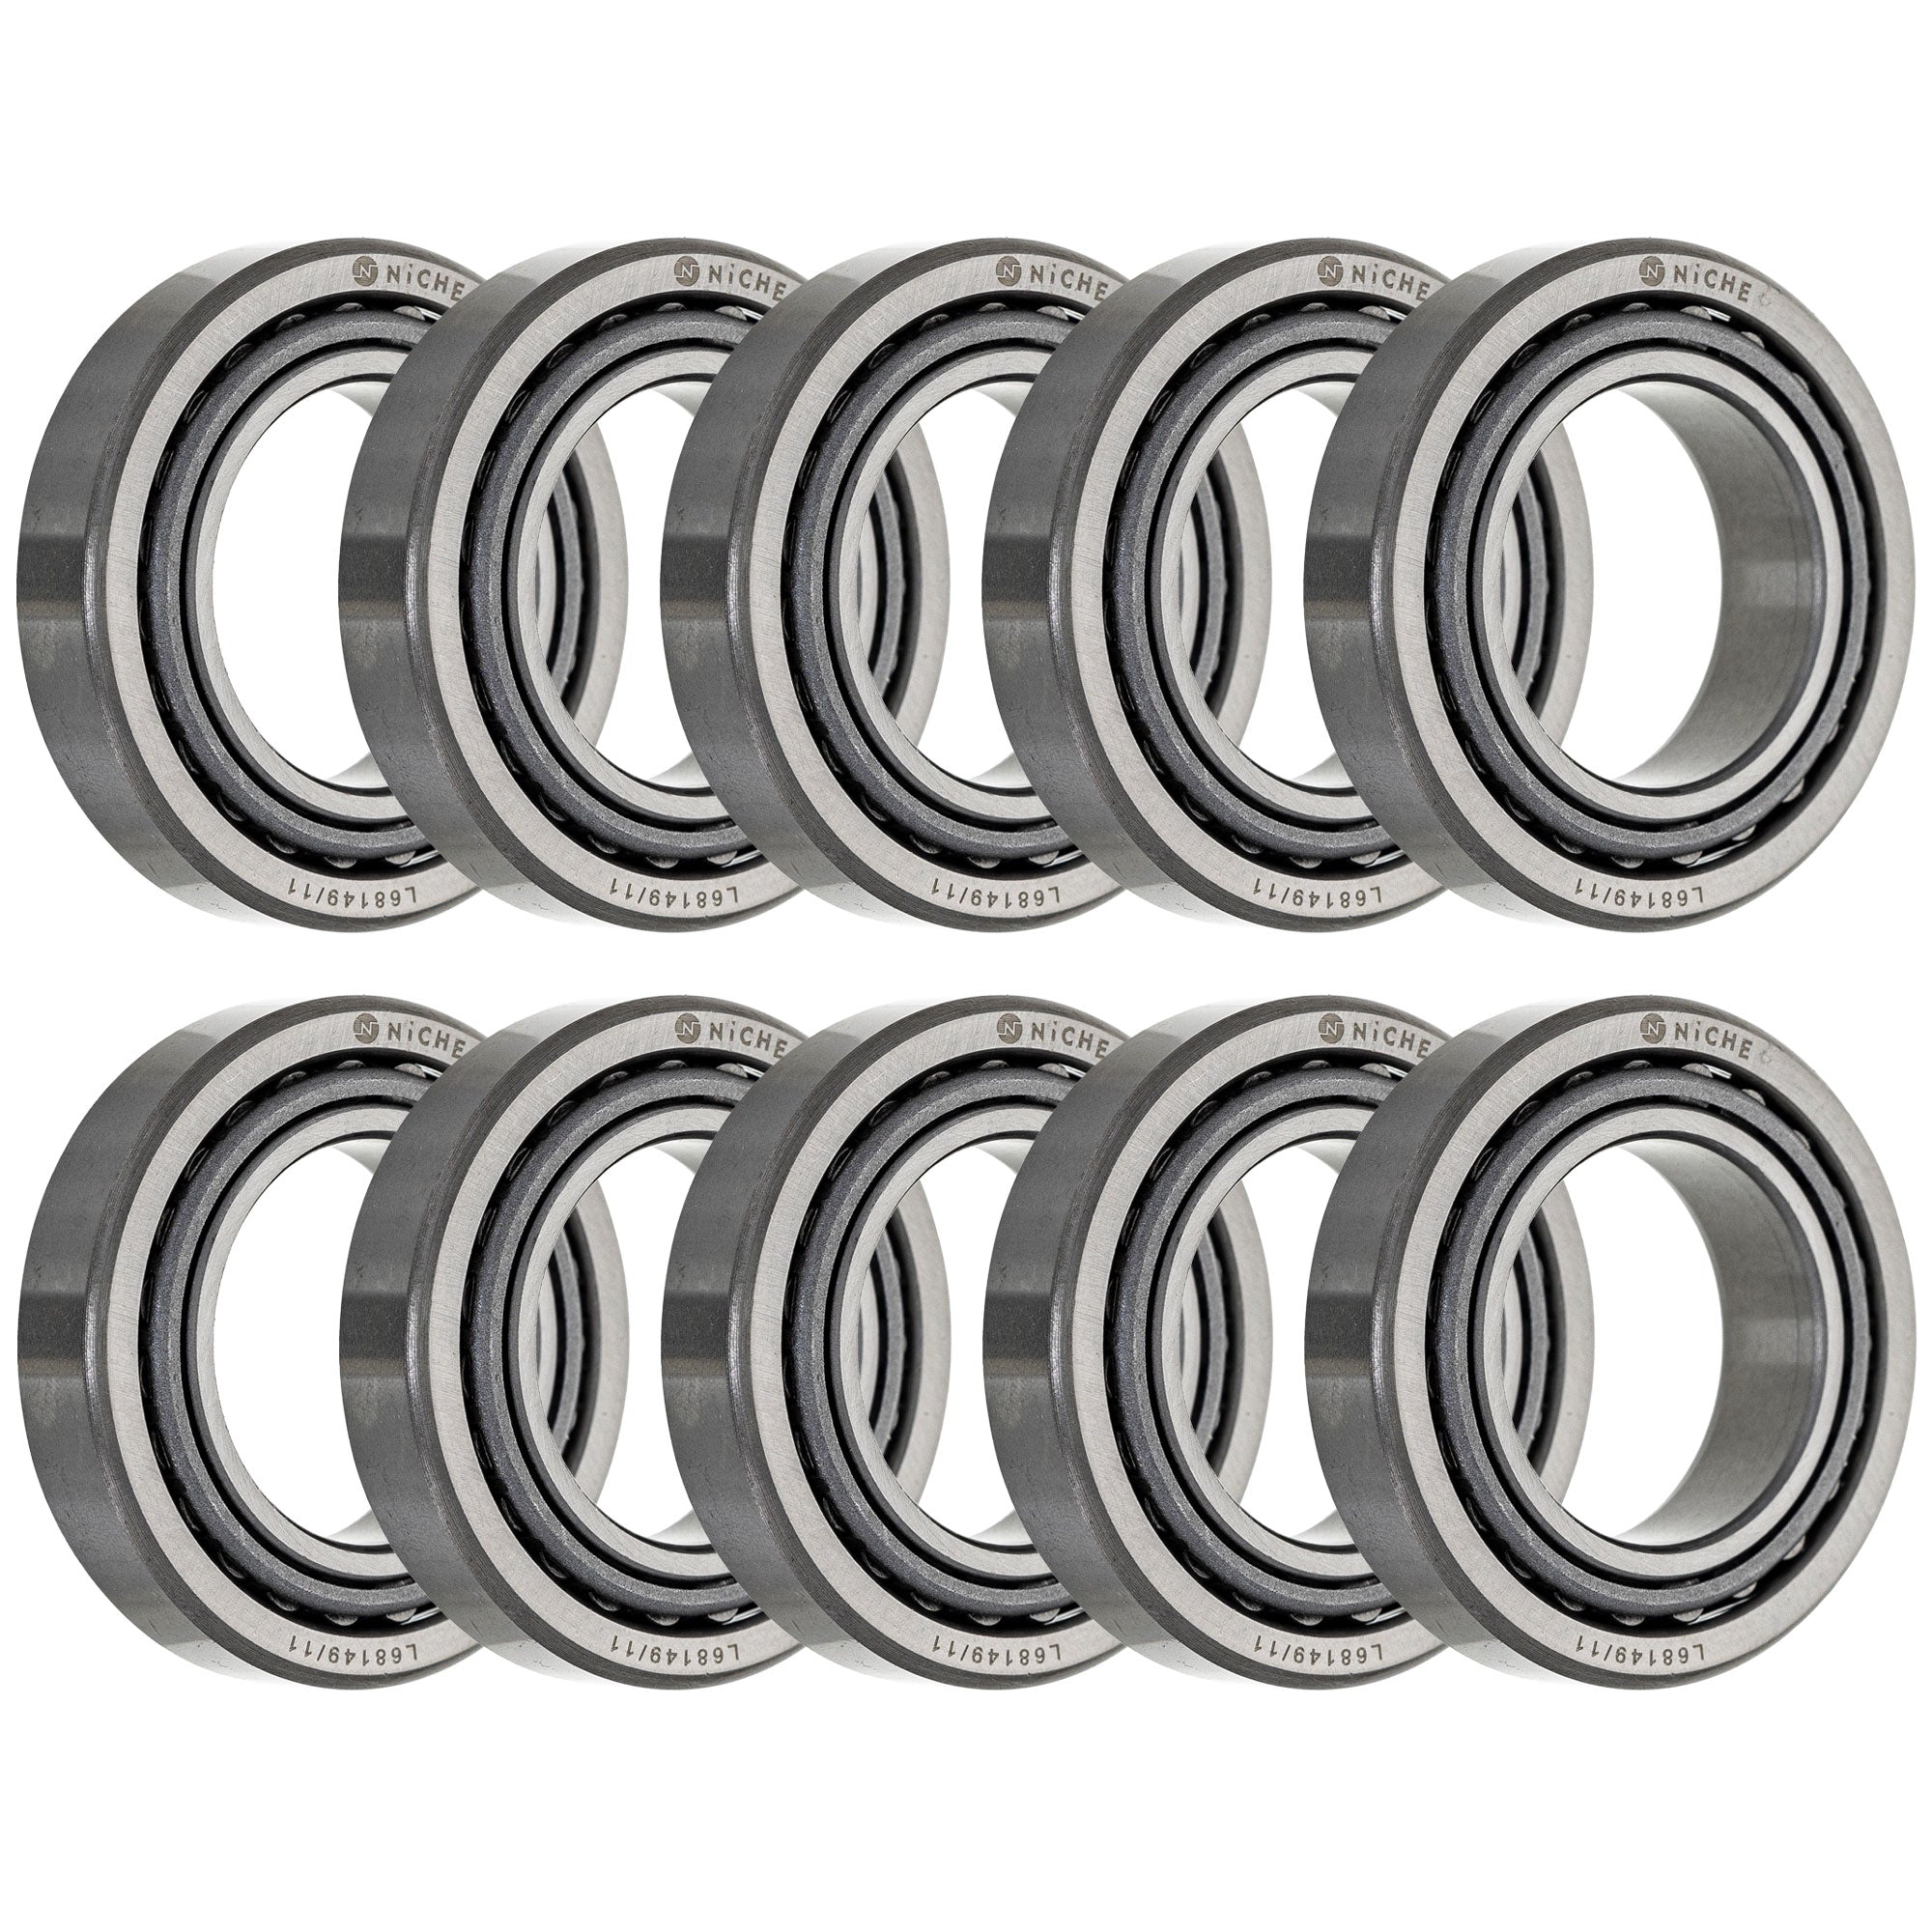 Tapered Roller Bearing Pack of 10 10-Pack for zOTHER Xplorer Trail-Boss Trail-Blazer Sport NICHE 519-CBB2285R